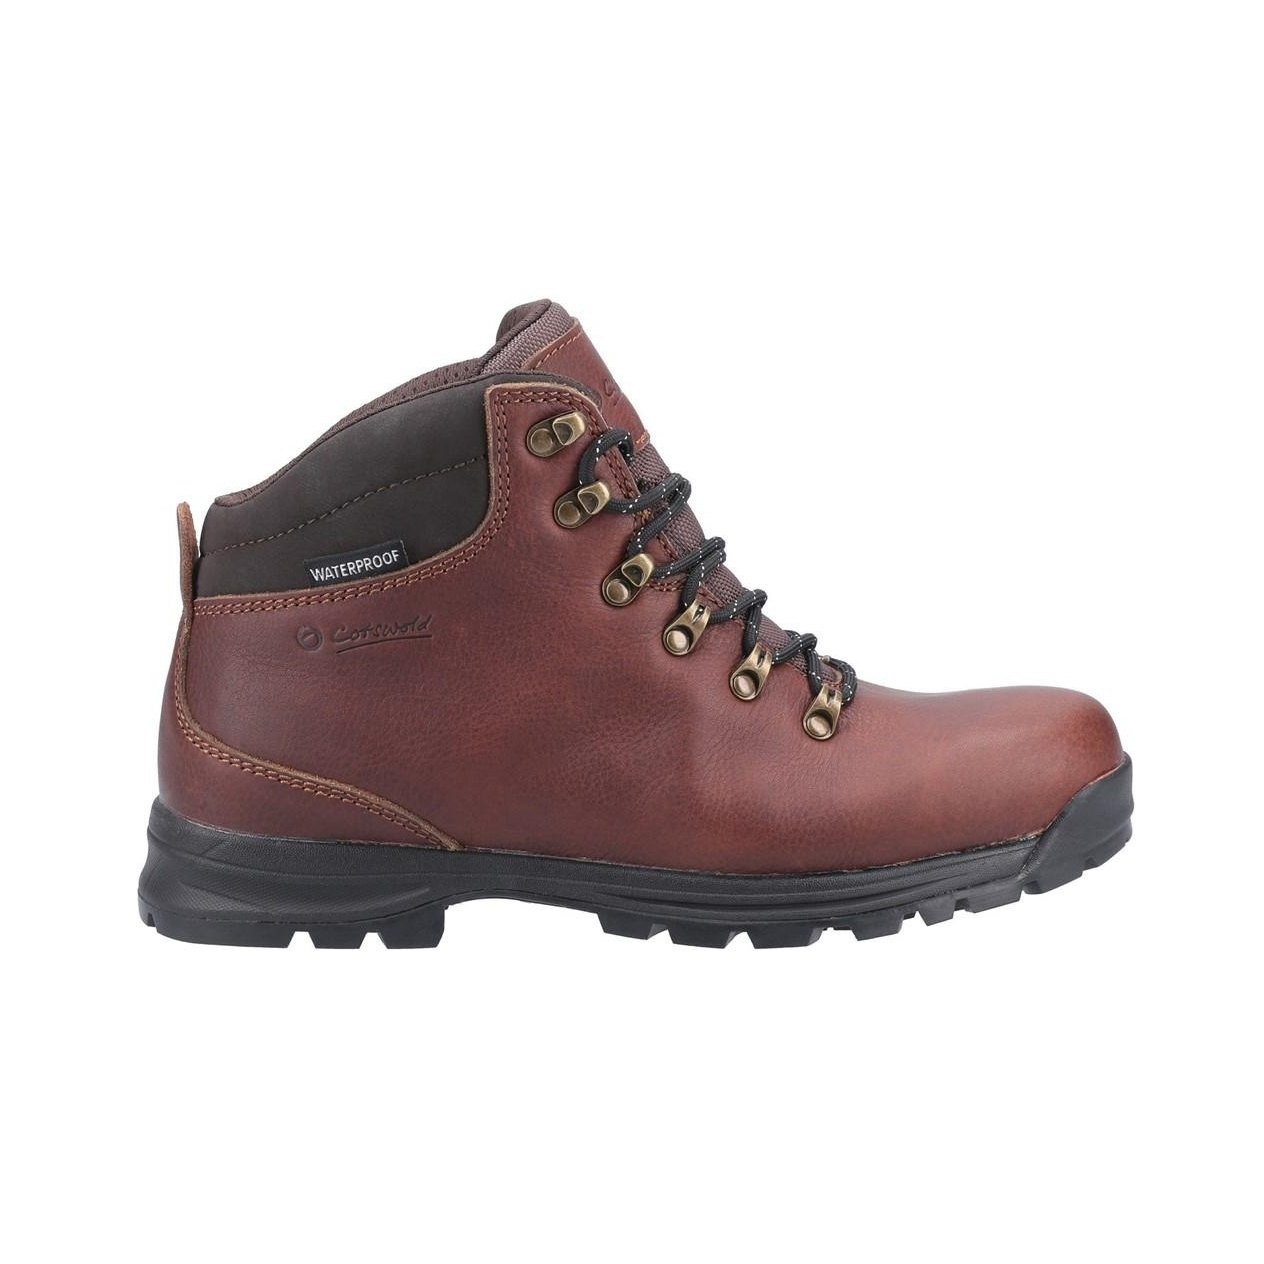 Mens Lace Up Leather Hiking Boot Cotswold Kingsway - marron - 